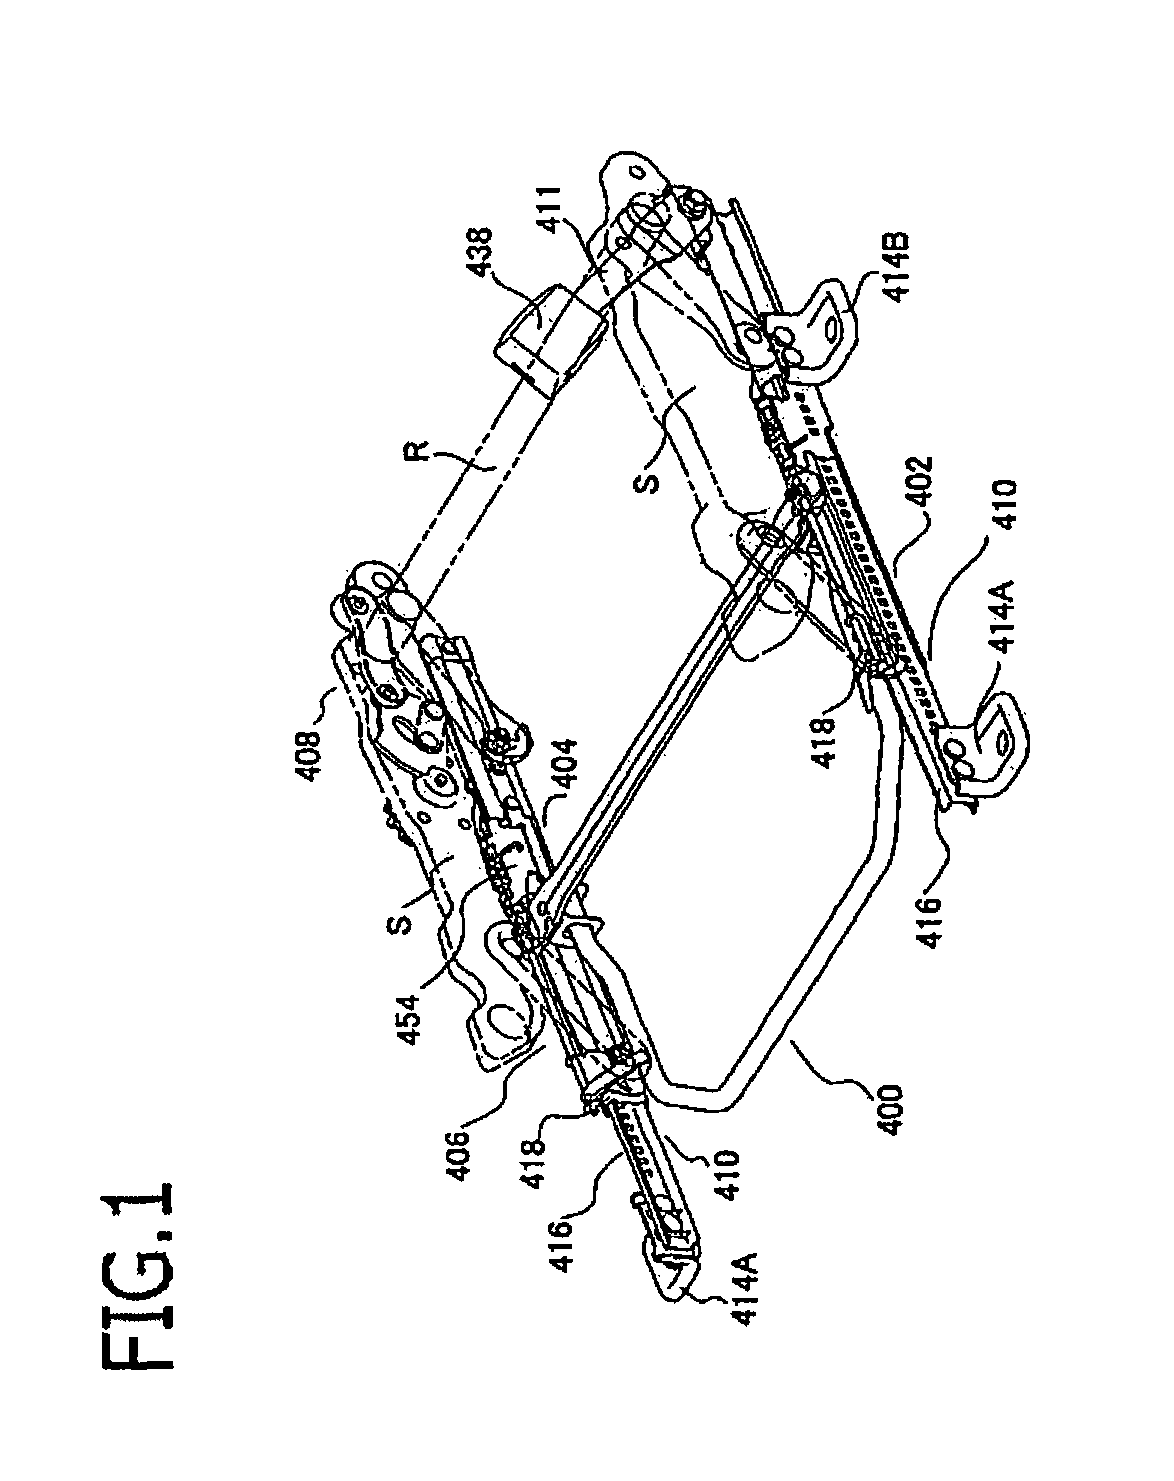 Slide structure of seat for vehicle